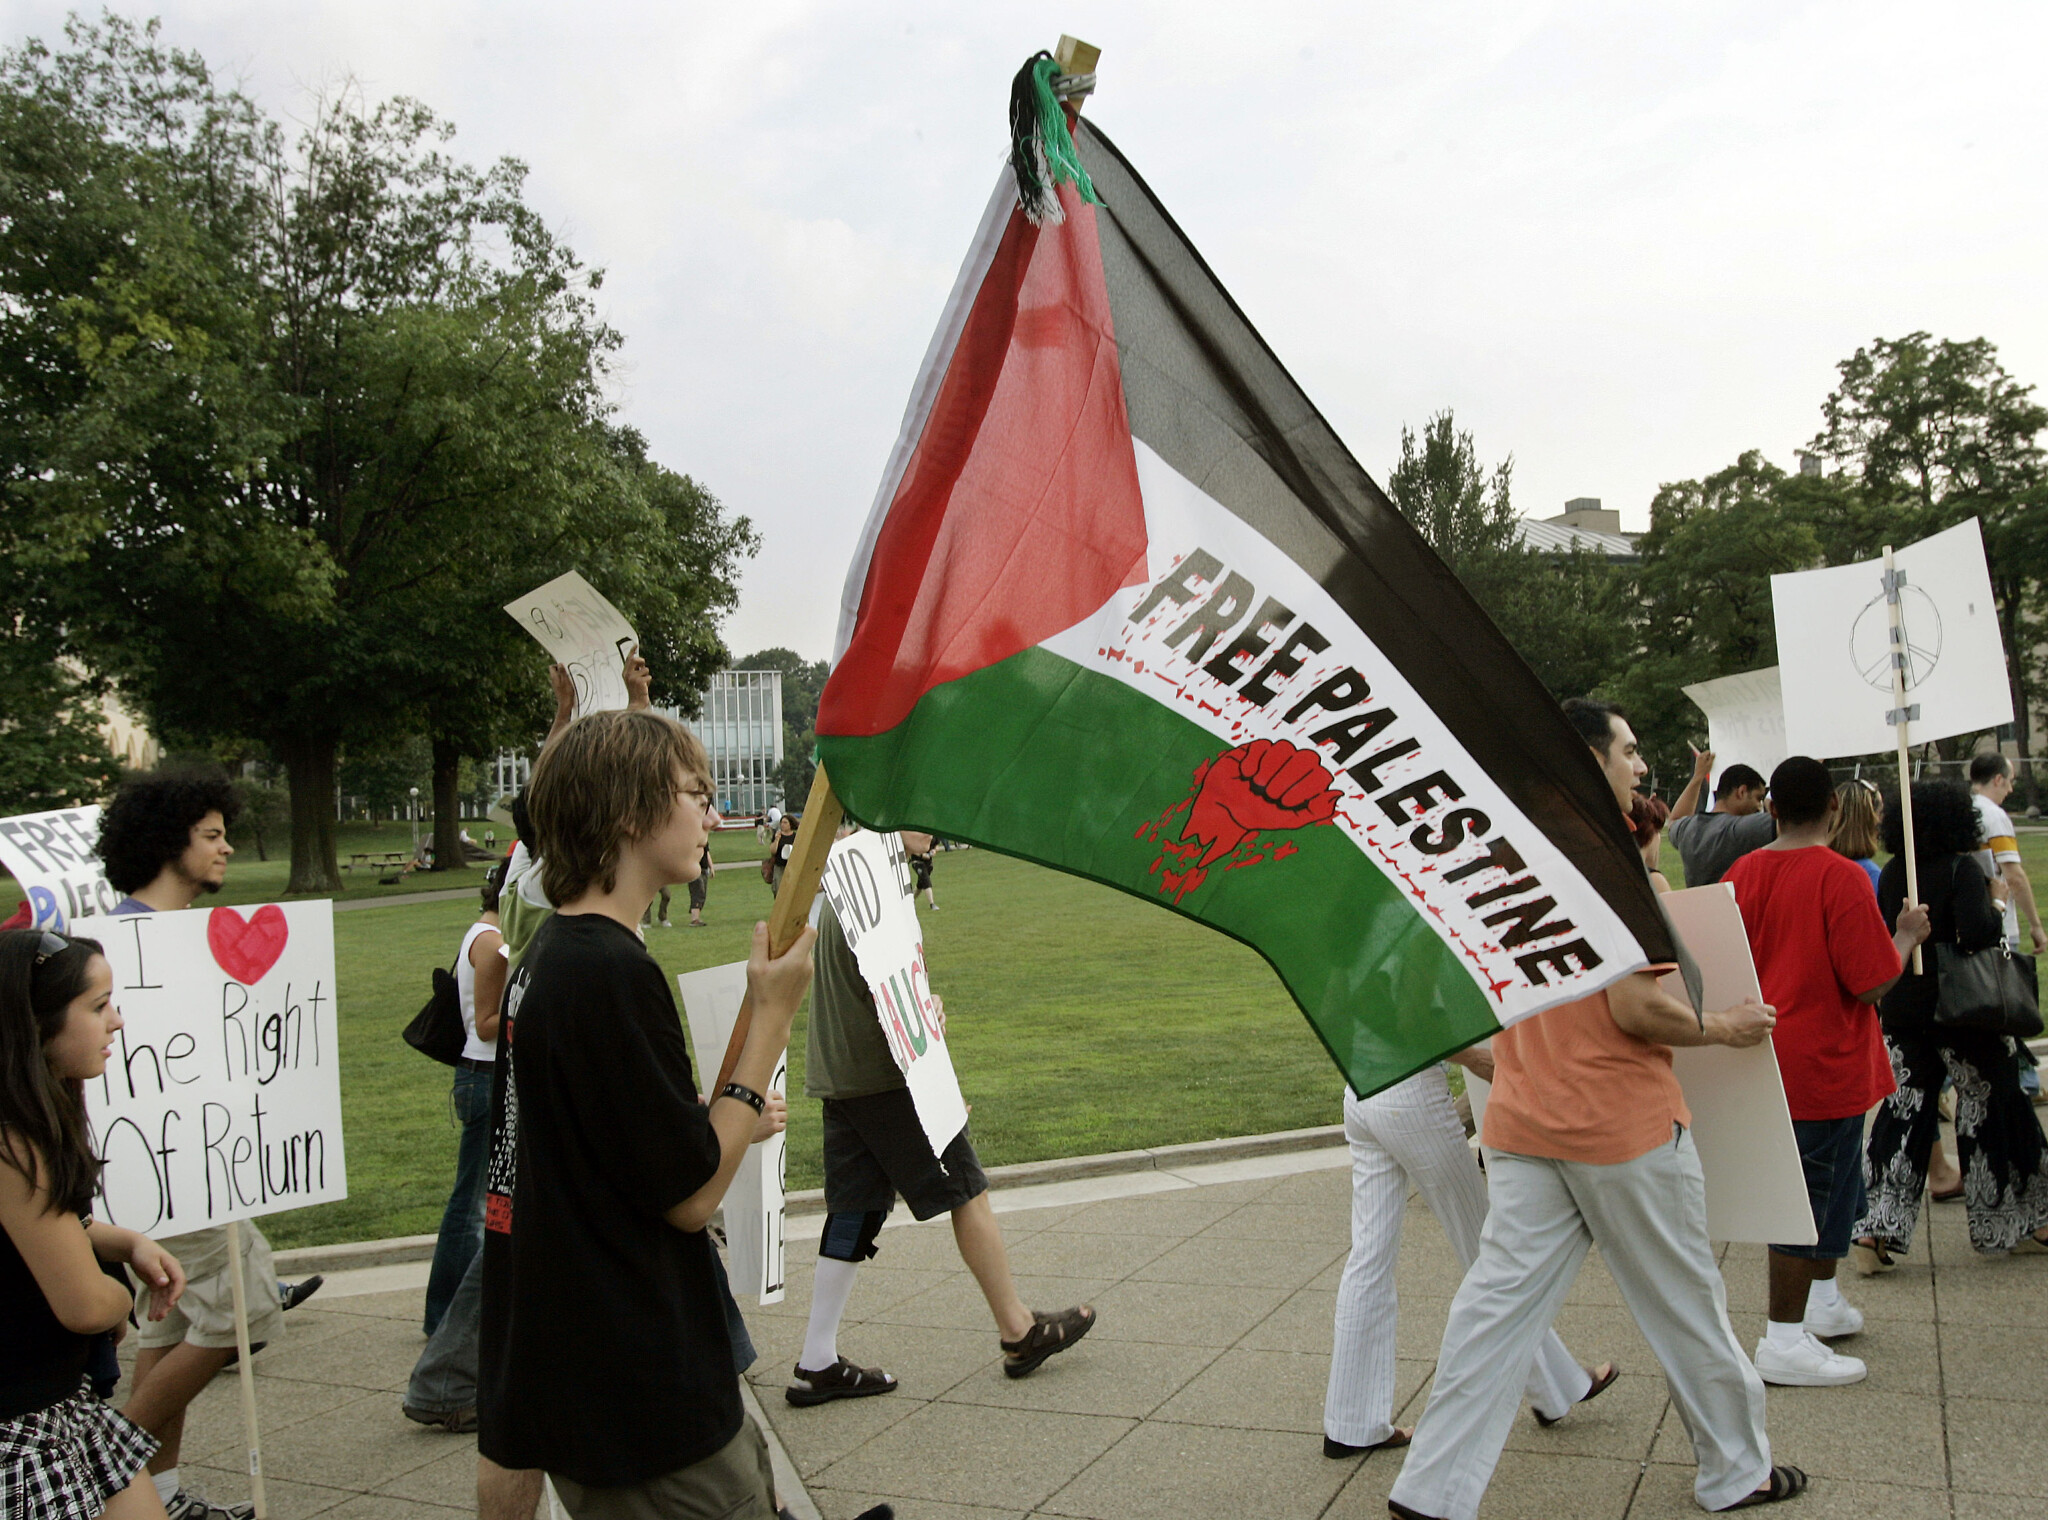 As campus anti-Semitism morphs, bullied Jewish students counter-organize